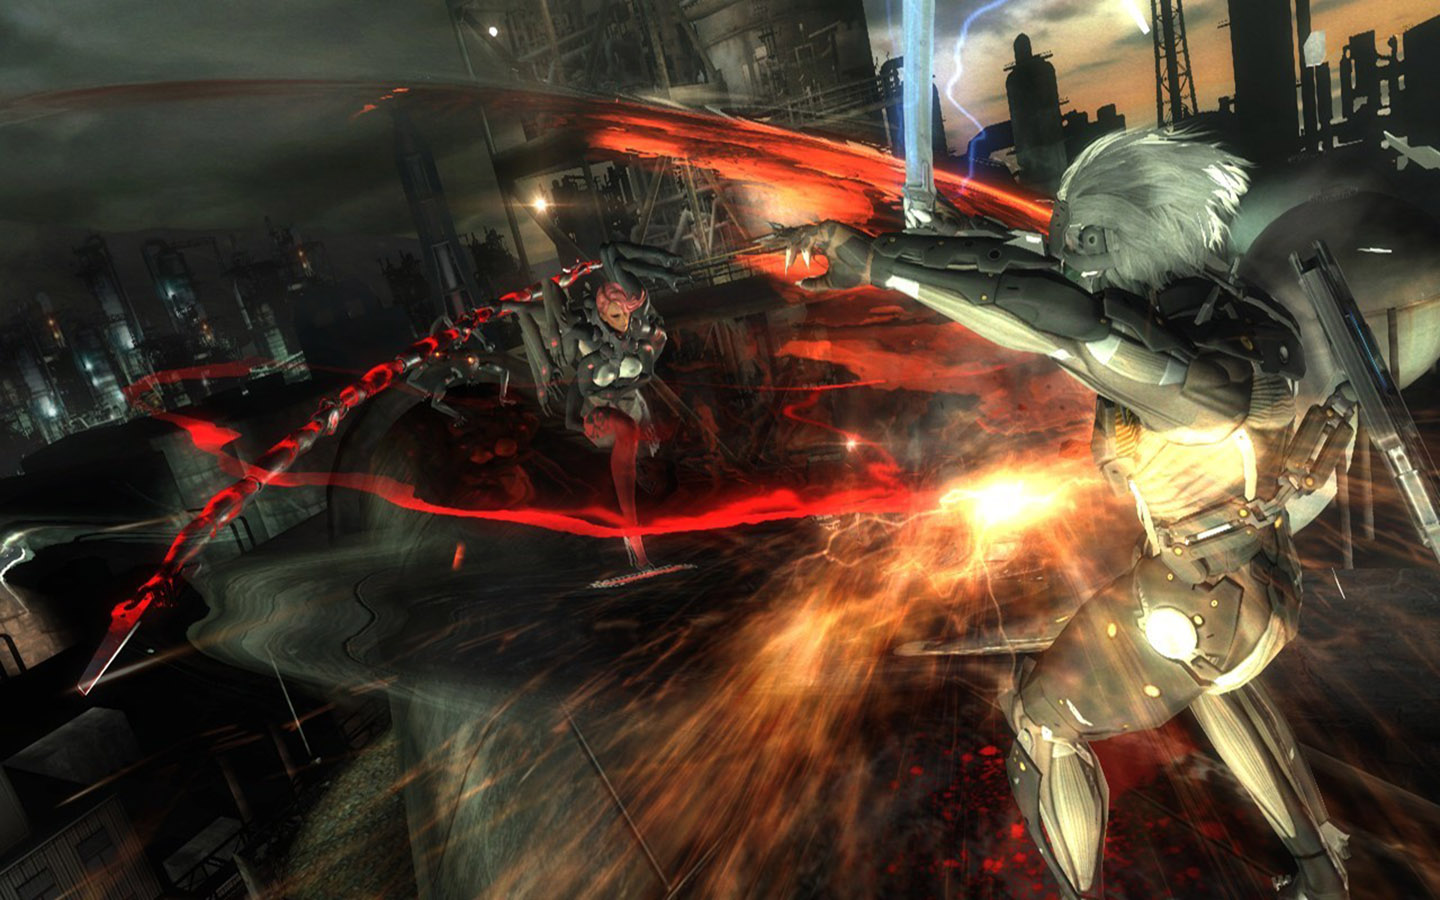 Metal Gear Rising Revengeance: you can sell limbs for upgrades